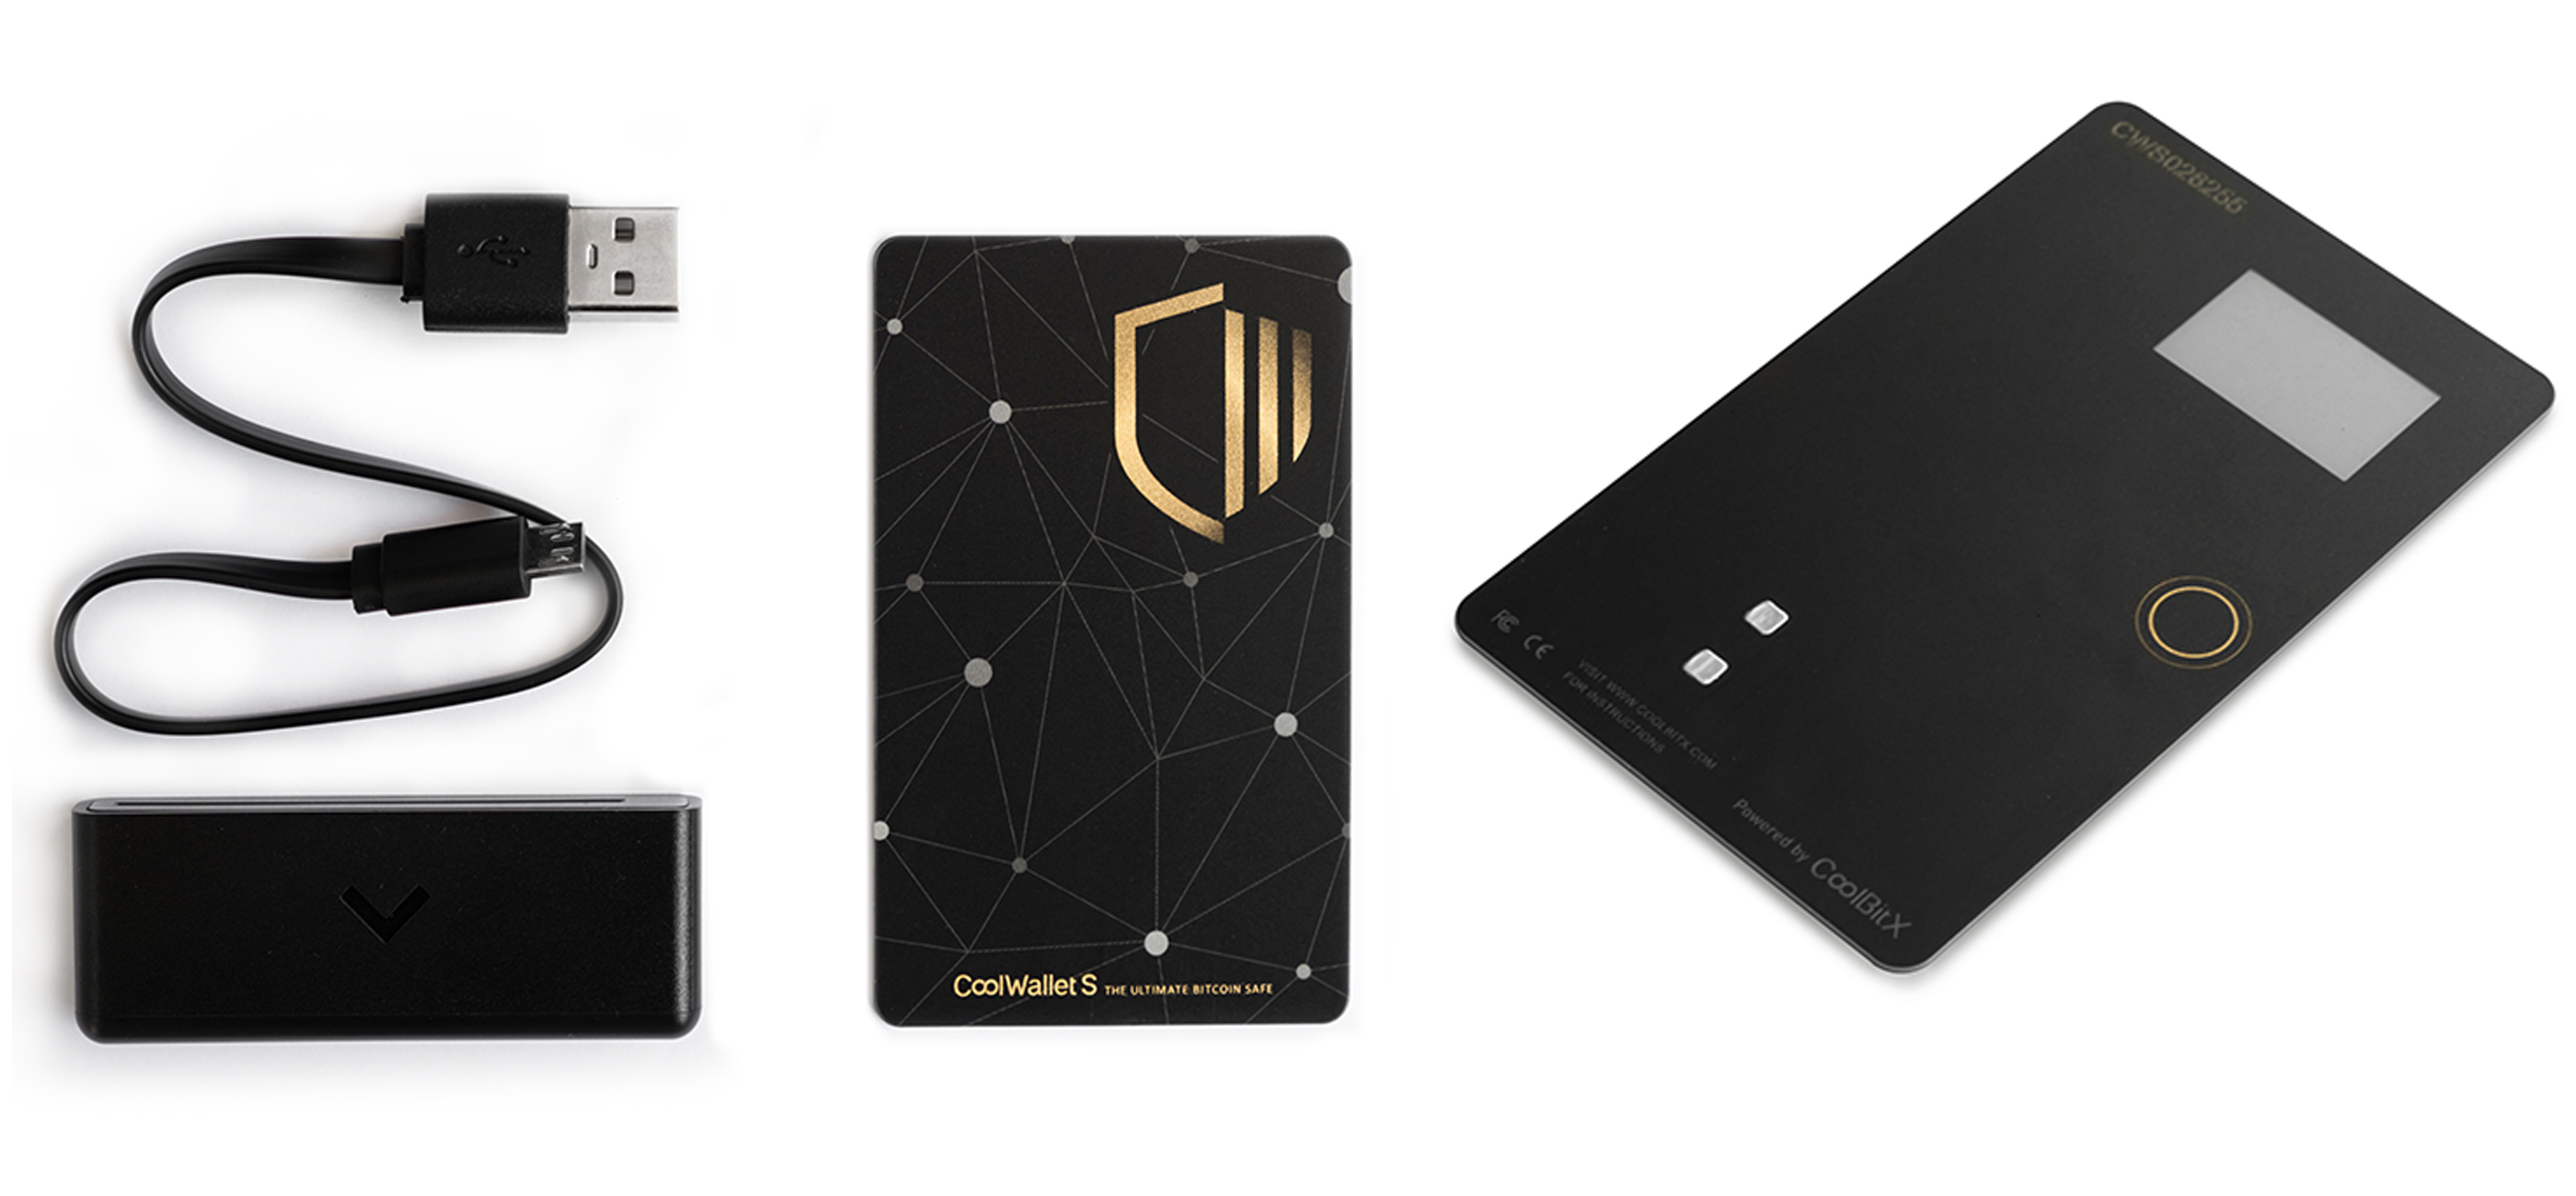 A Look at the Credit Card Shaped Hardware Device Called 'Coolwallet' 